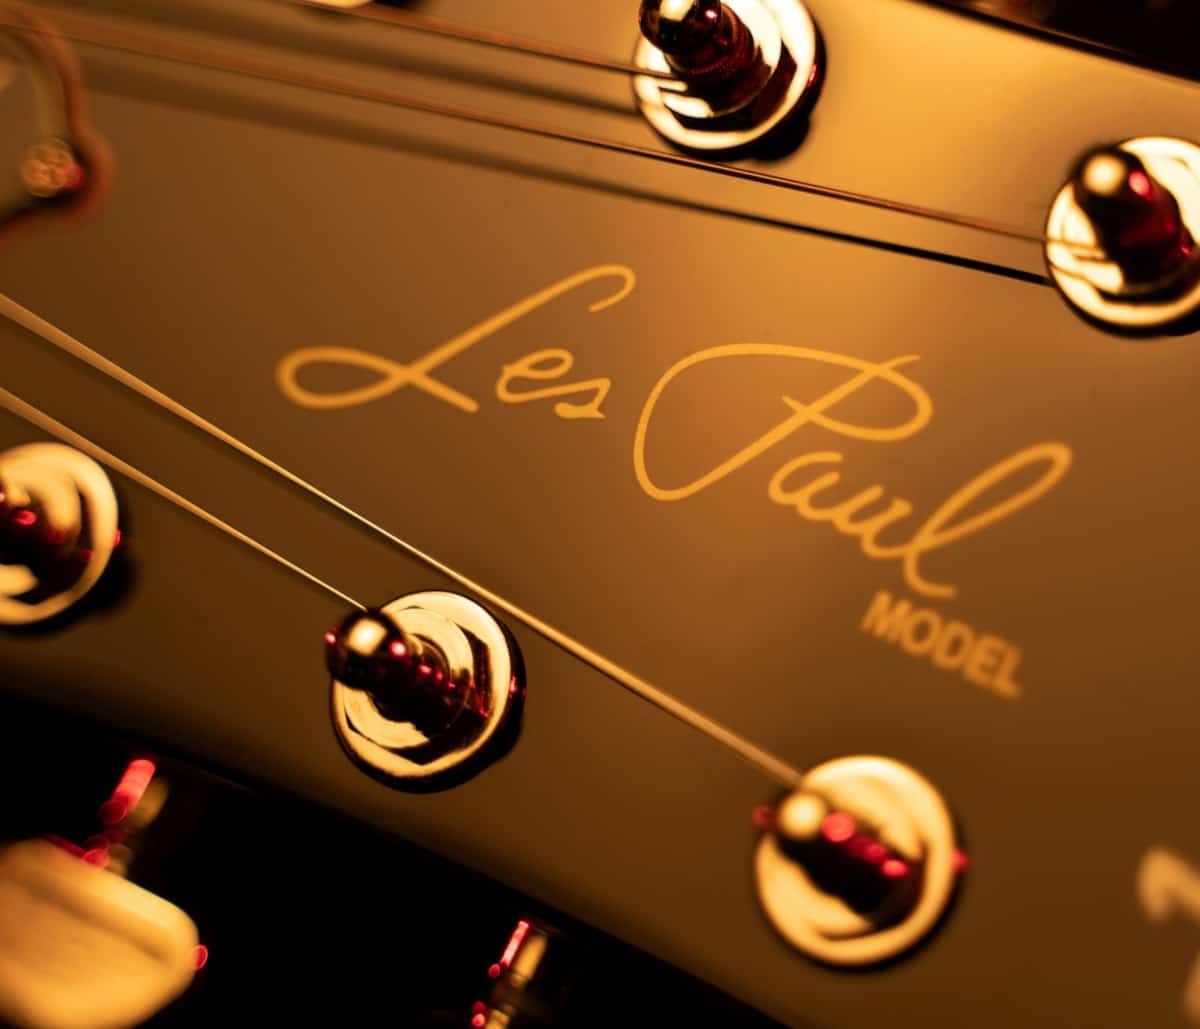 Gibson Les Paul Junior vs Special: Which is the Best Option? - Pro 